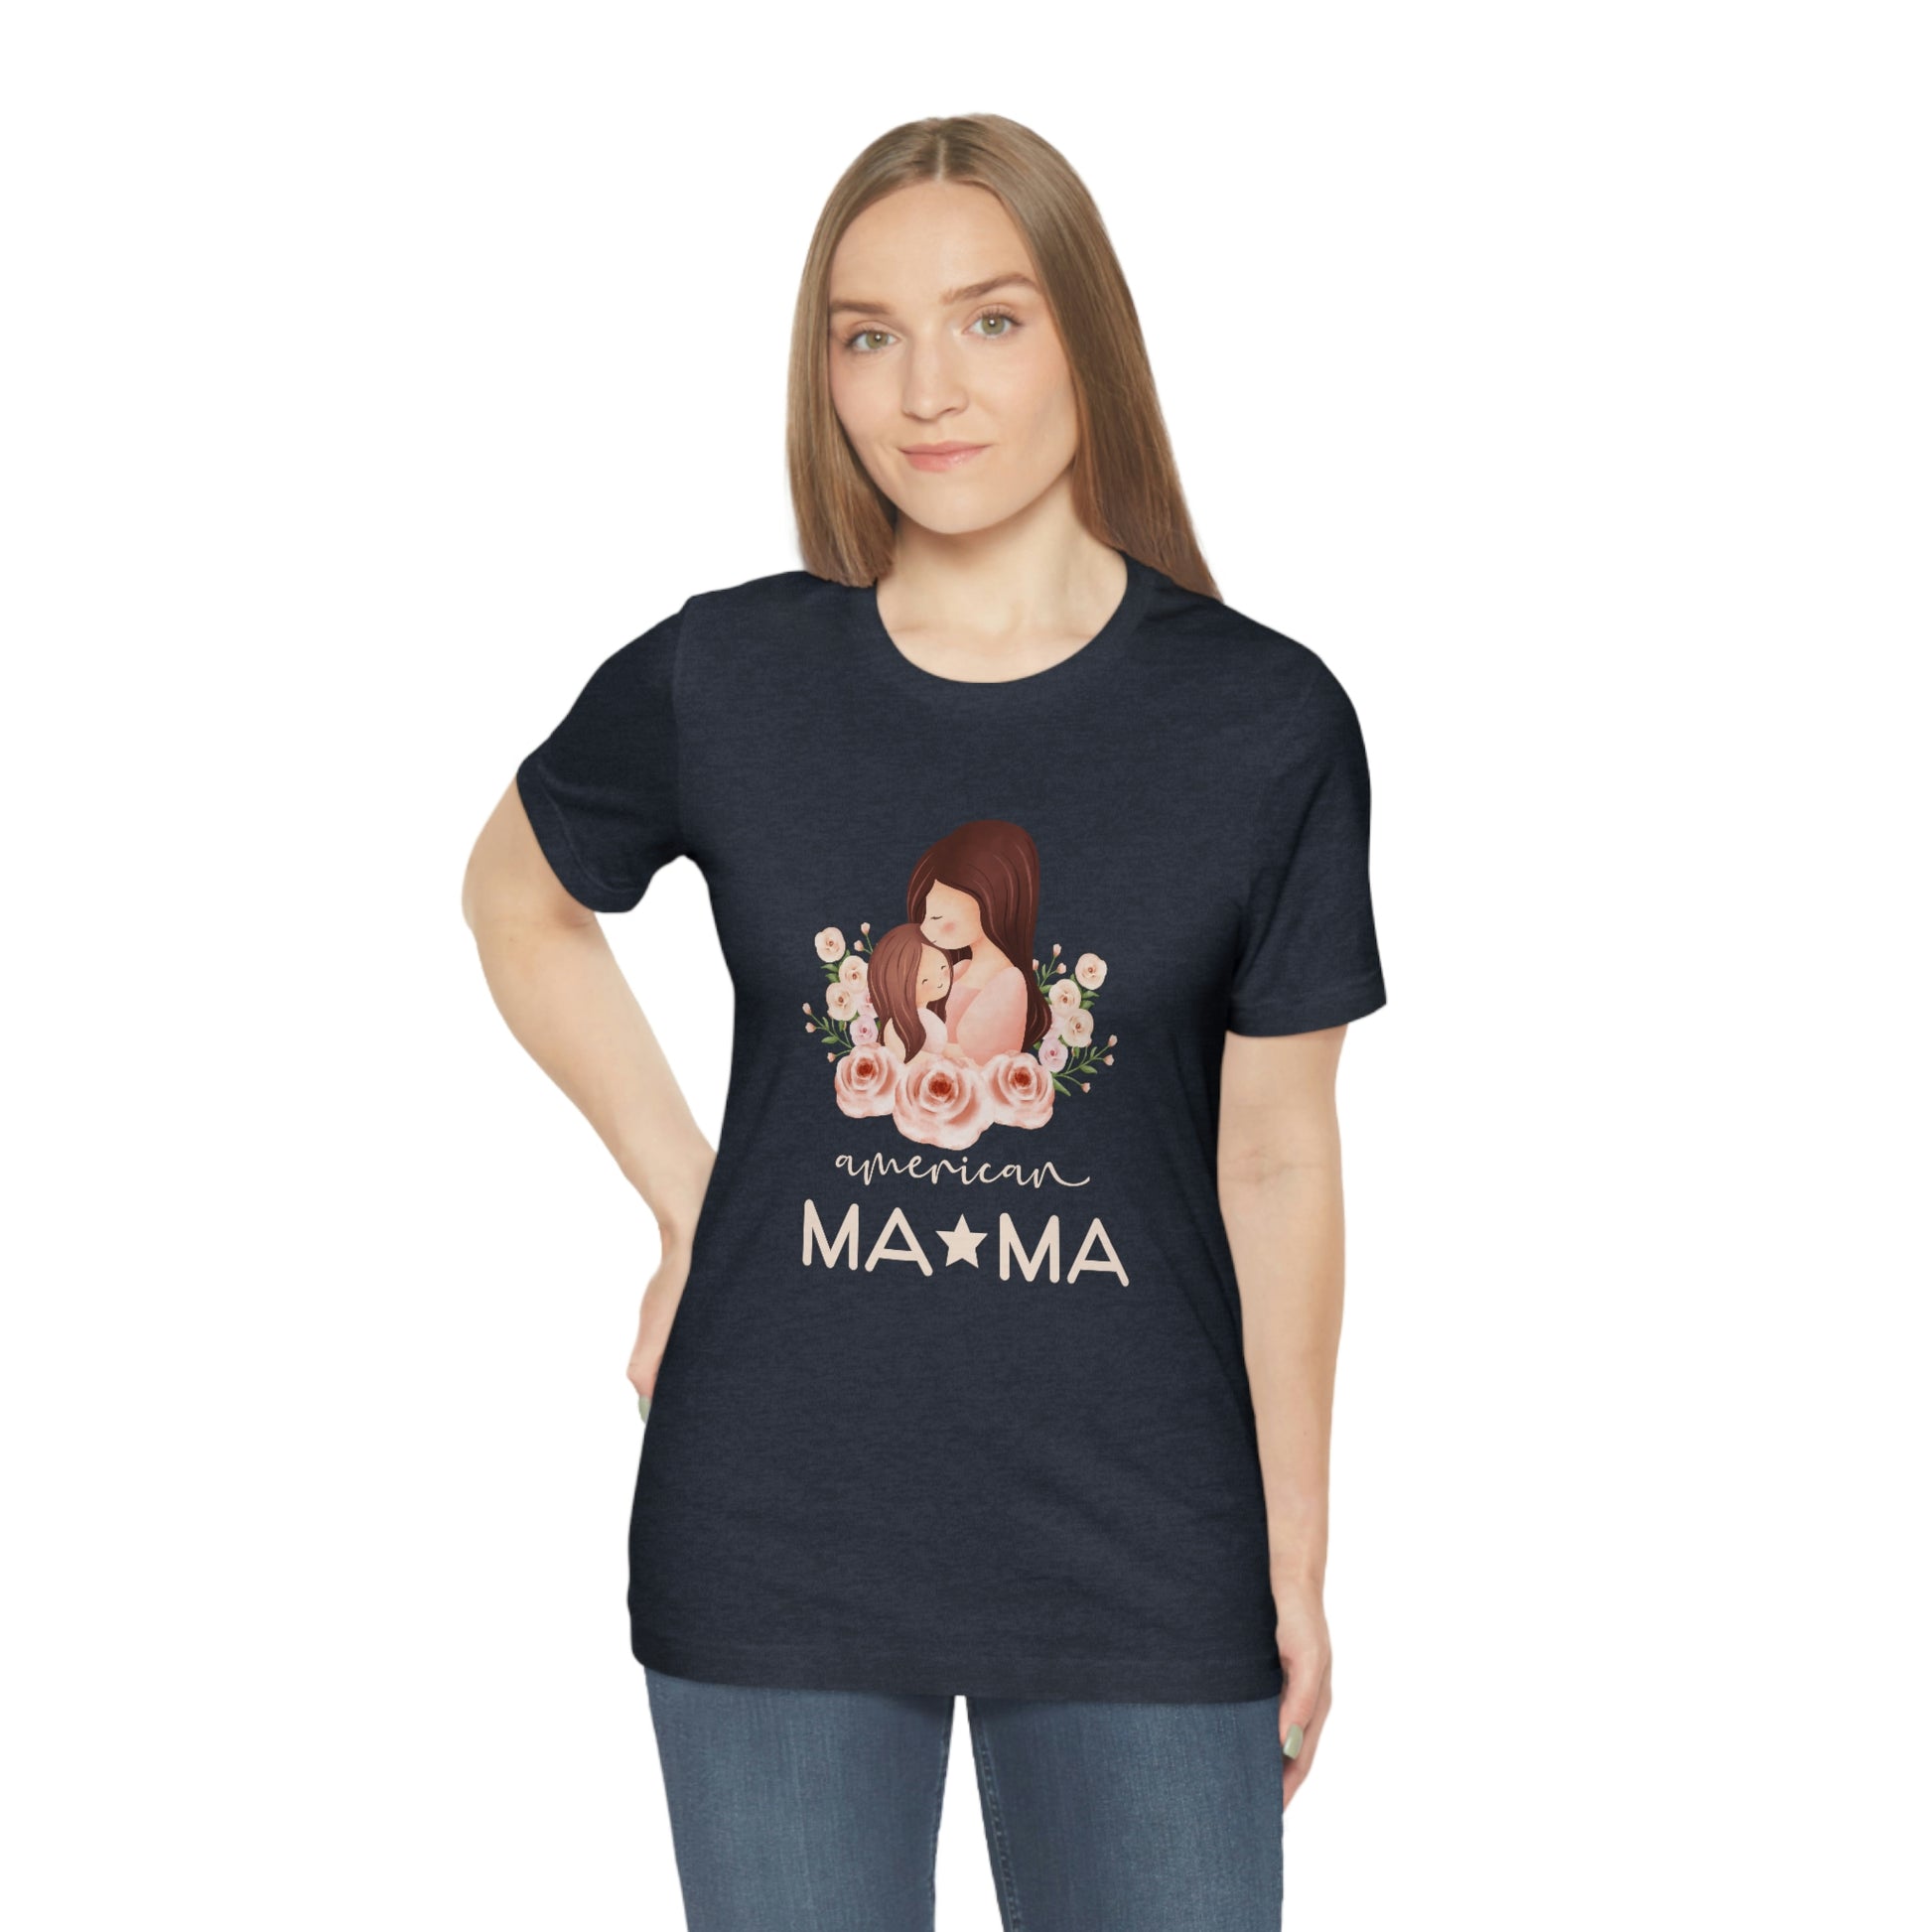 Get ready to make a statement with our American Mom heather navy jersey short sleeve t-shirt. A perfect Mother's Day gift for any mom. Celebrate her with this unique and stylish t-shirt.